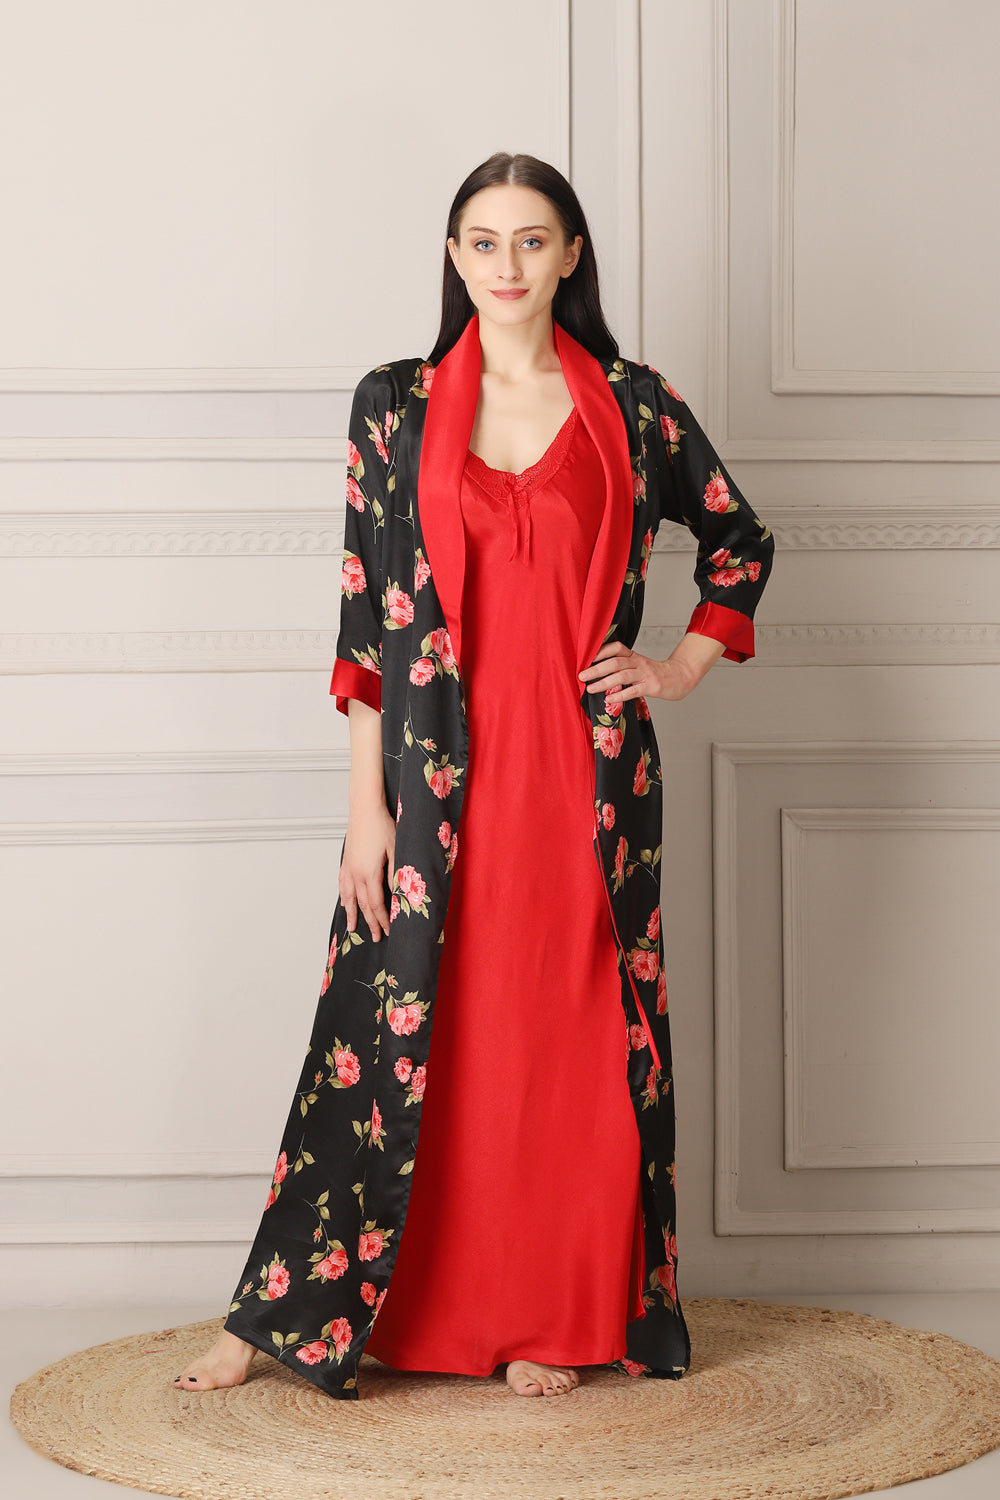 Red Satin Nighty & Print Robe Nightgown set Private Lives